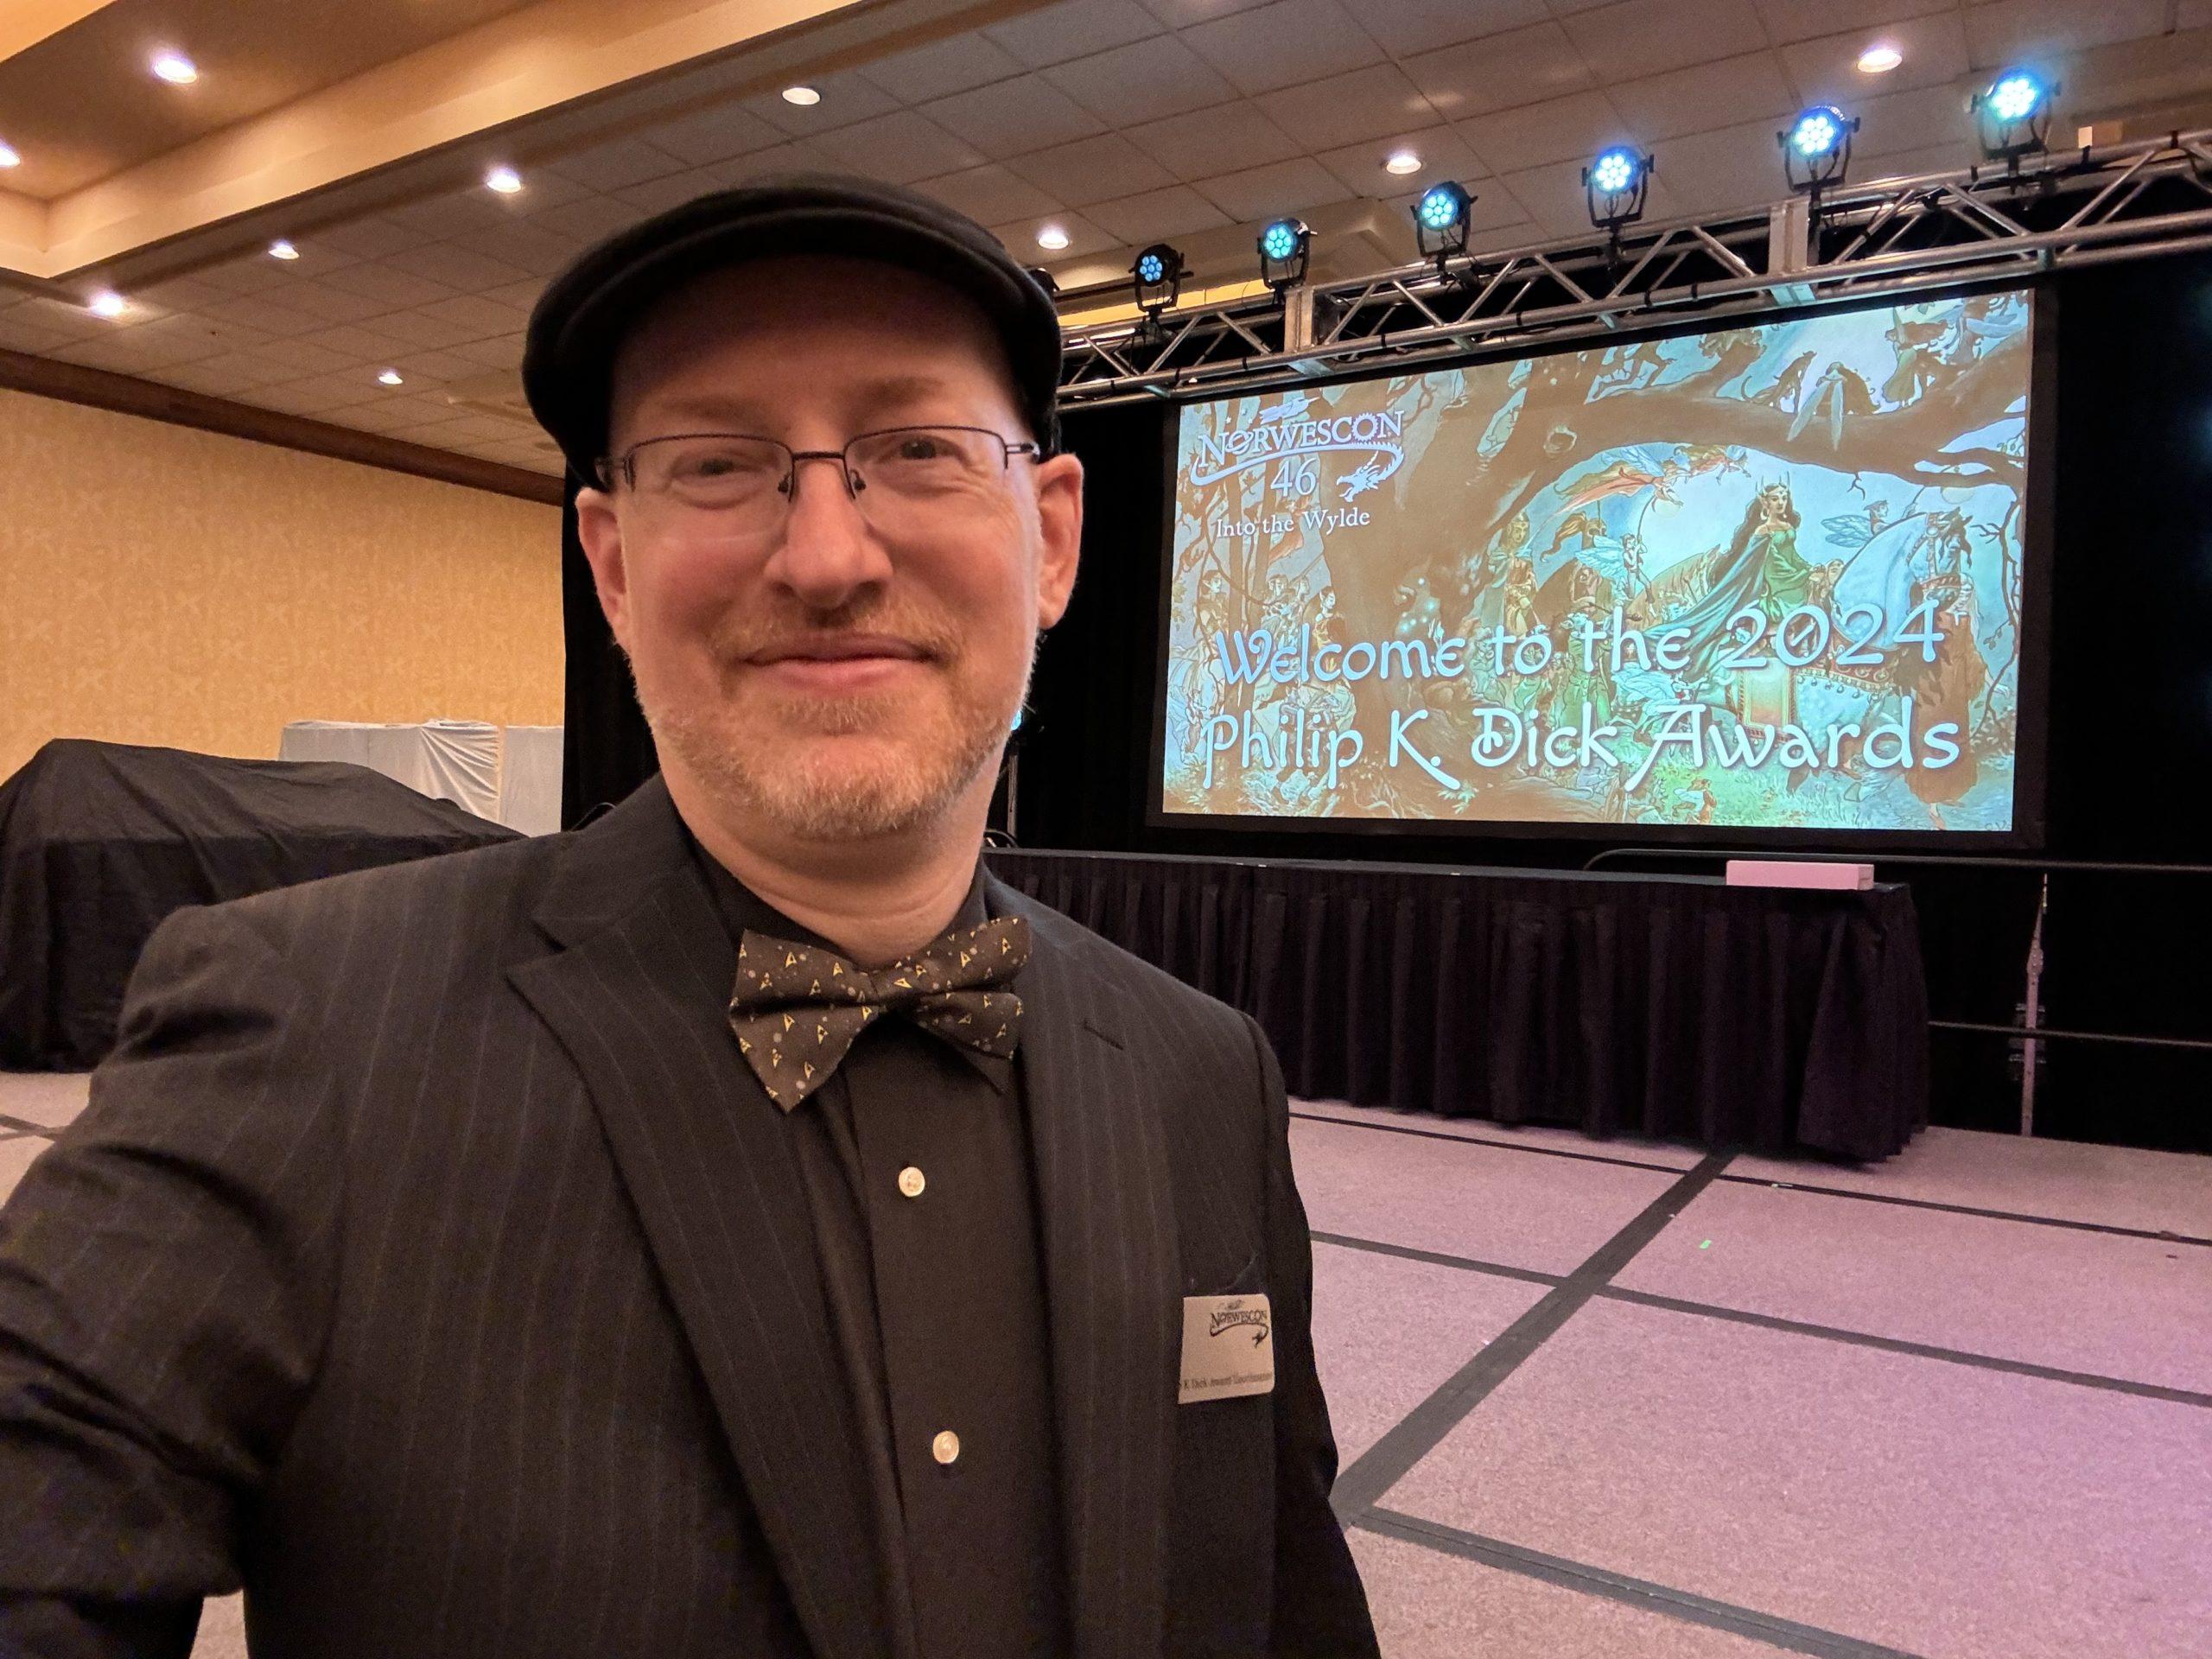 Me wearing a black cap, black suit jacket with grey pinstripes, black shirt, and Star Trek bow tie, in front of a stage with a screen showing a slide that says 'Welcome to the 2024 Philip K Dick Awards'